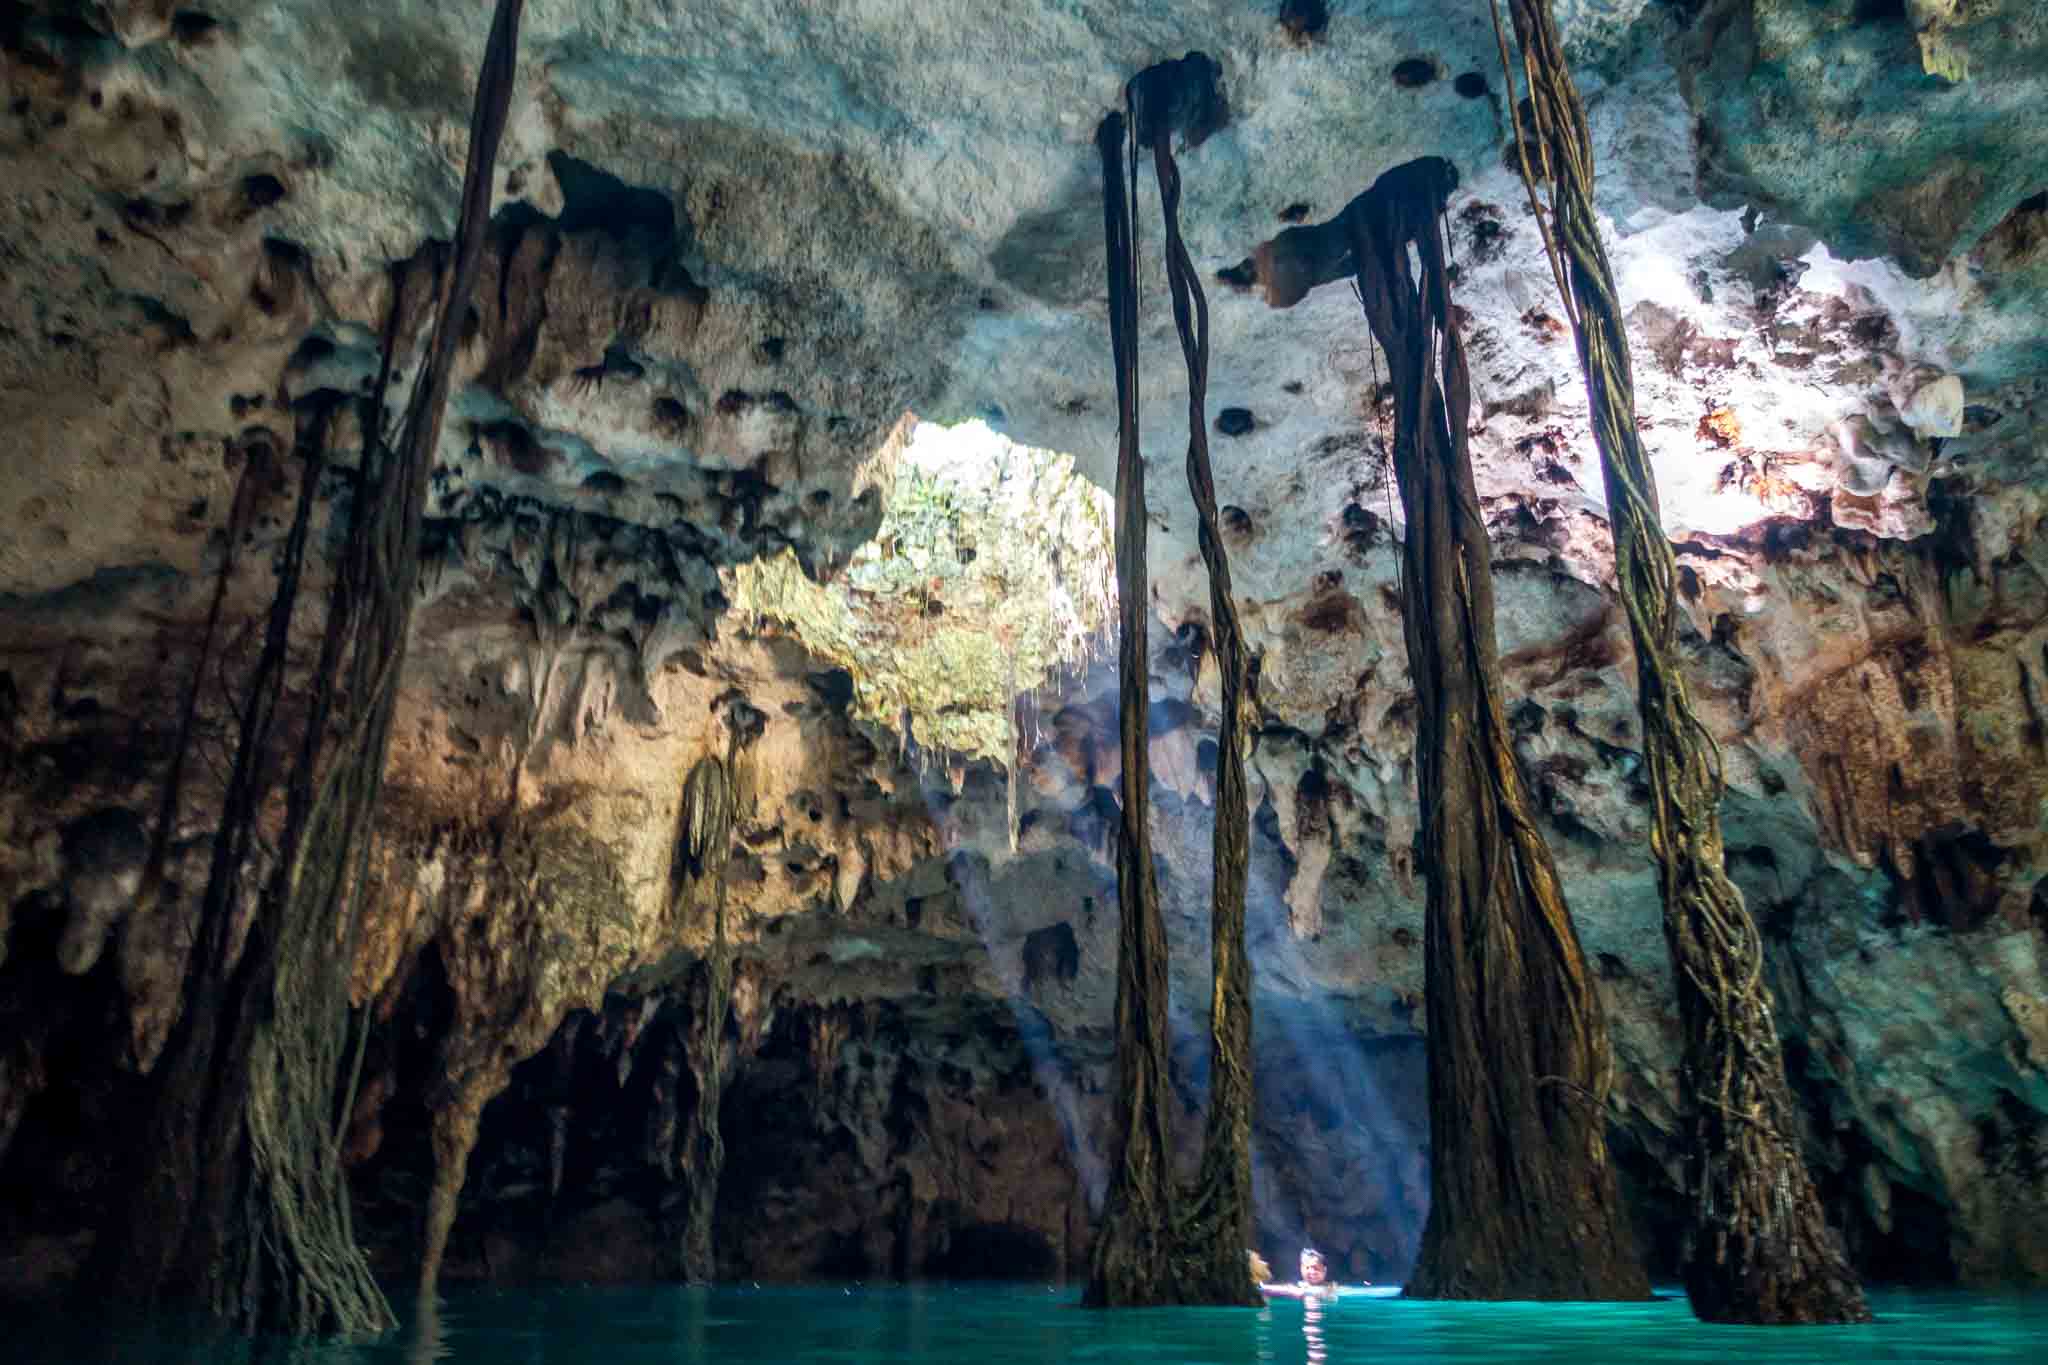 Inside a cave cenote with large roots near Cancun, Mexico